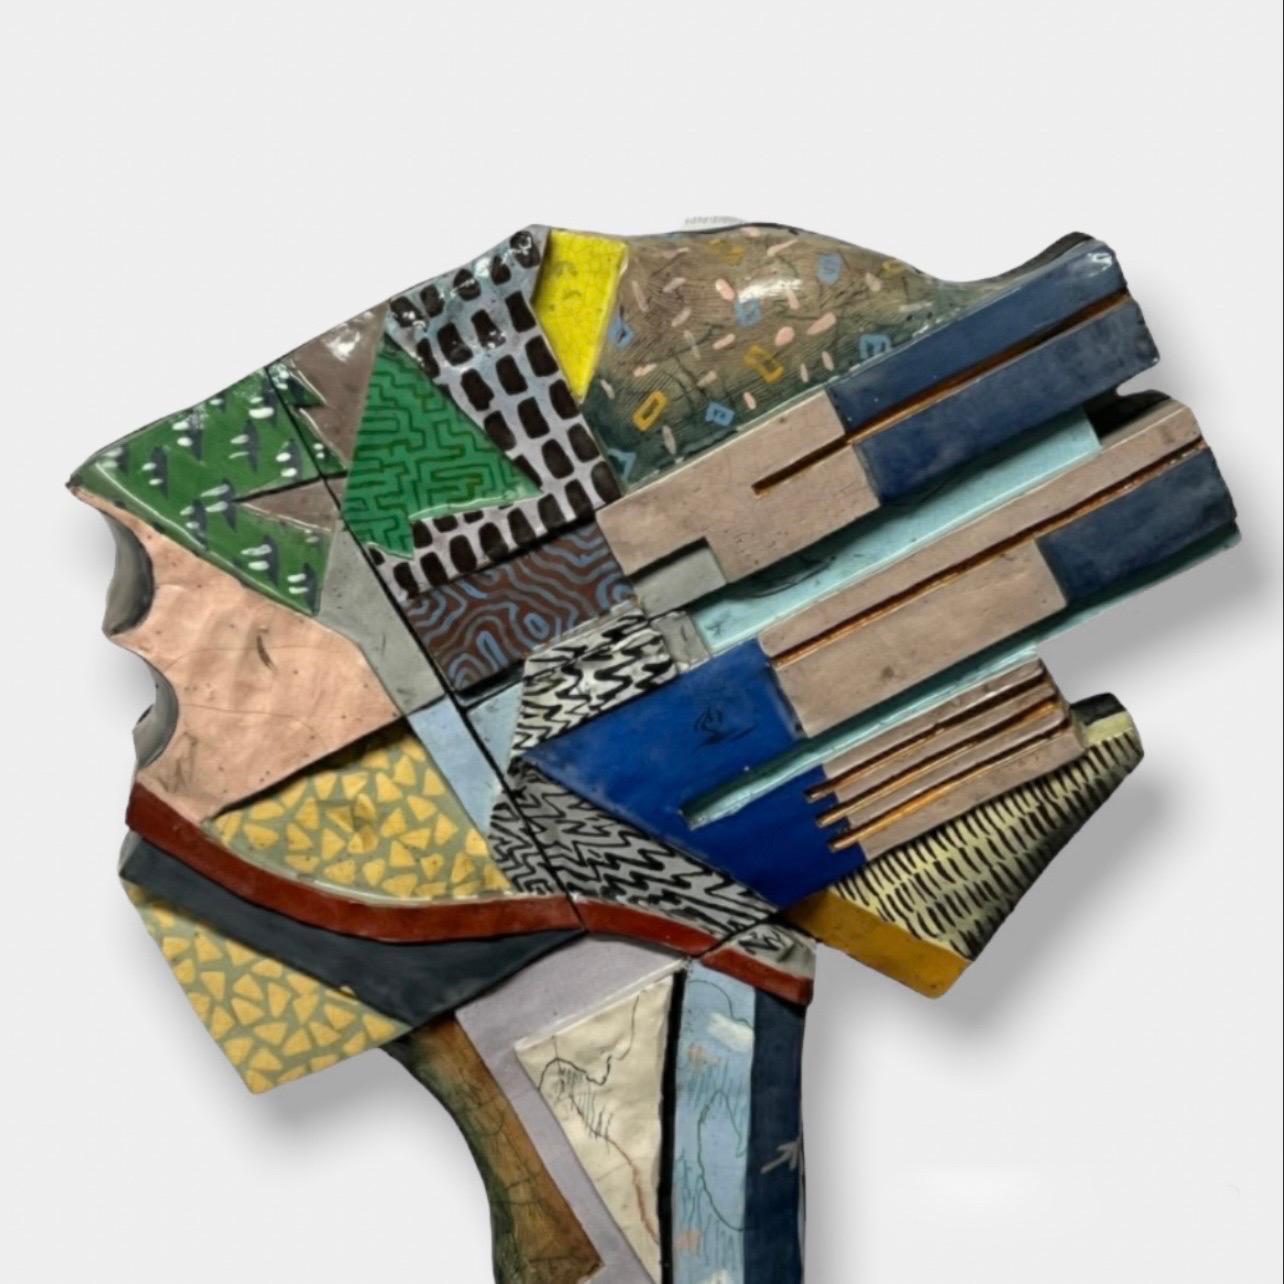 Fantastic Memphis-style ceramic wall sculpture by artist, Michael Hough c1990, titled, “Megalopolised”. (47” x 21” x 3.5”)

Hough has been creating ceramic pottery and steel sculptures for the past 35+ years. His art career began during his second